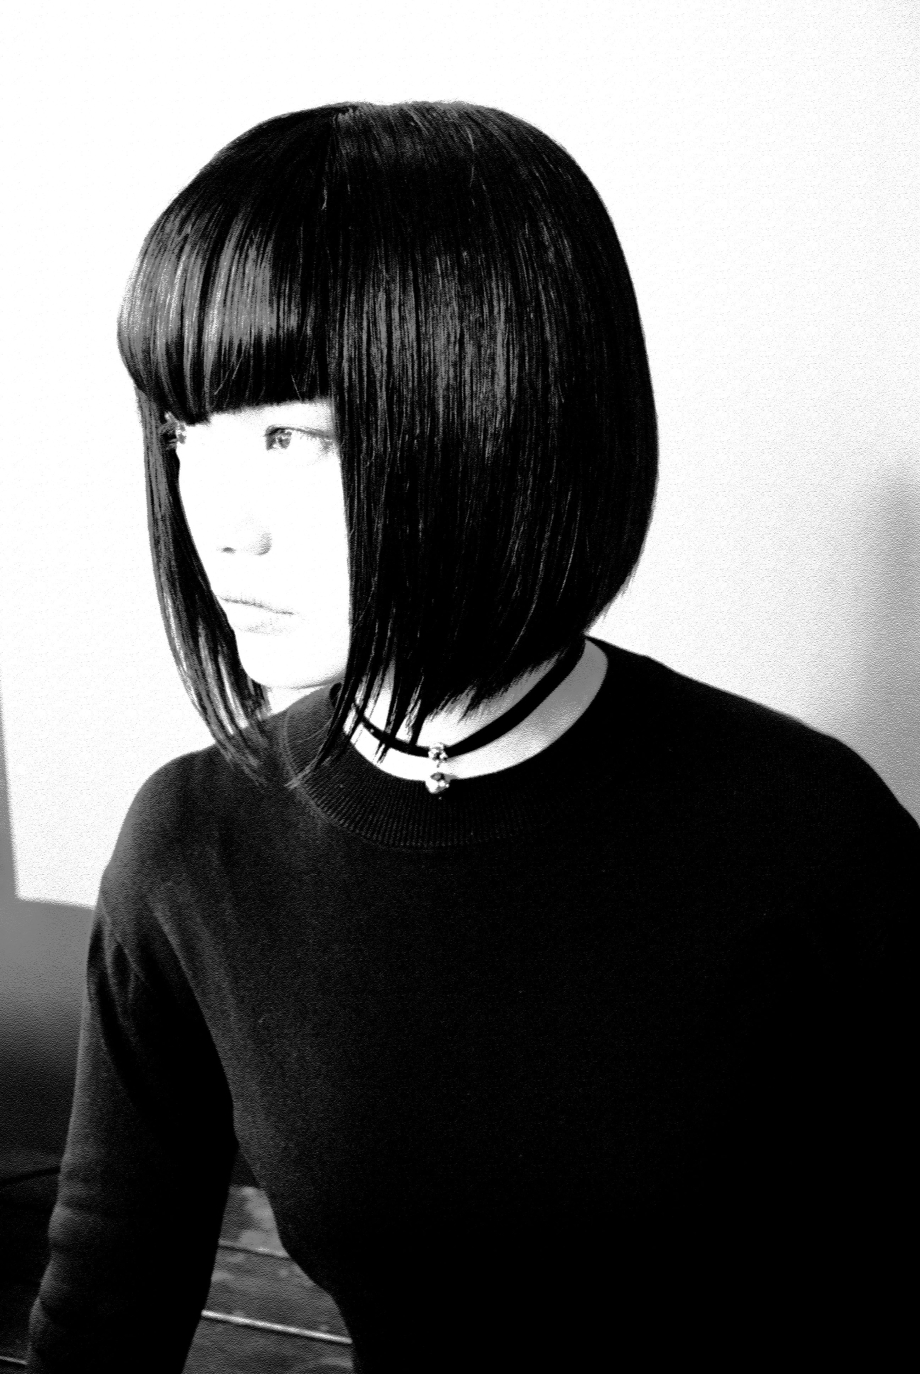 ＃Bob Hairstyles ＃Bob Haircuts ＃Best BobStyles #BELL桜新町/用賀